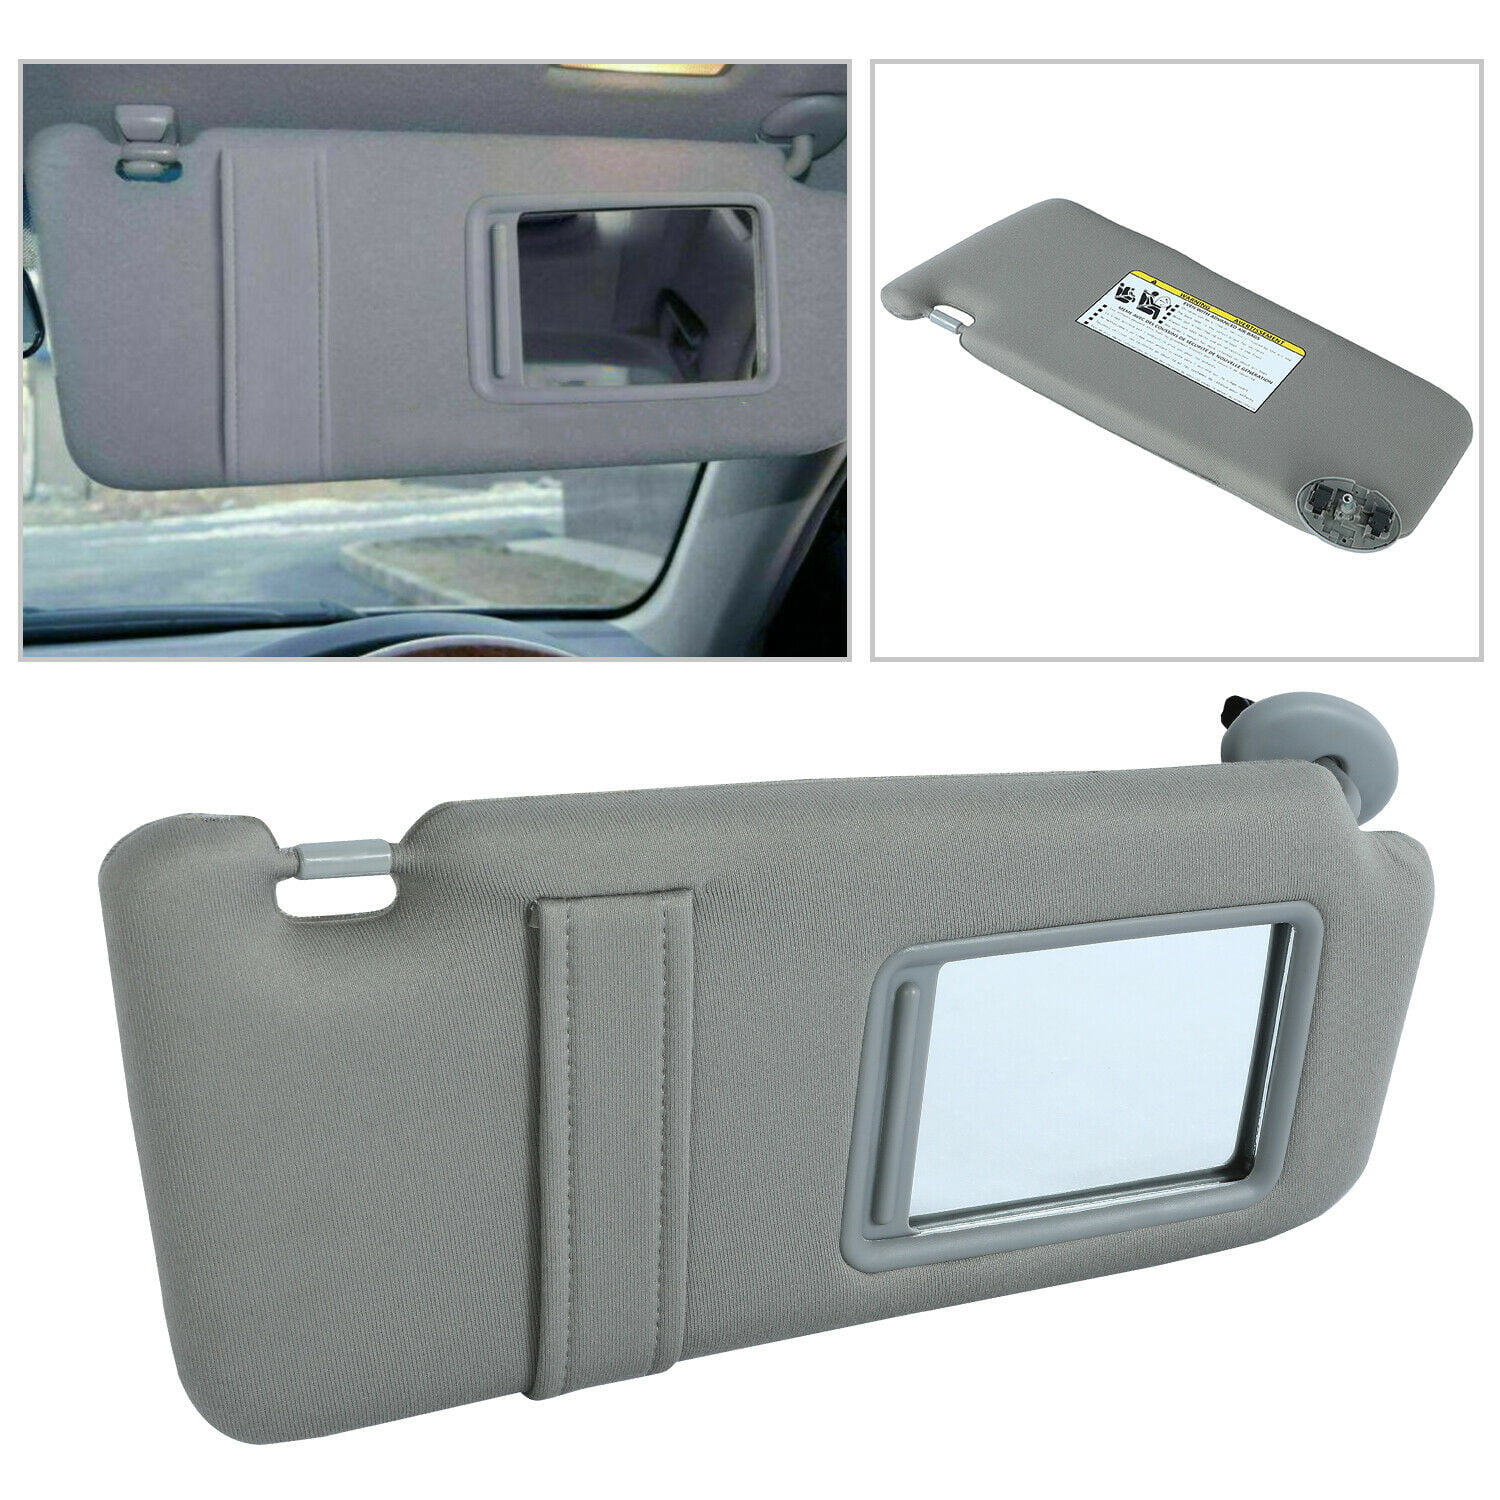 SAILEAD Sun Visor for 2007 2008 2009 2010 2011 Toyota Camry and Camry HV with Sunroof and Light Beige, Left Size 